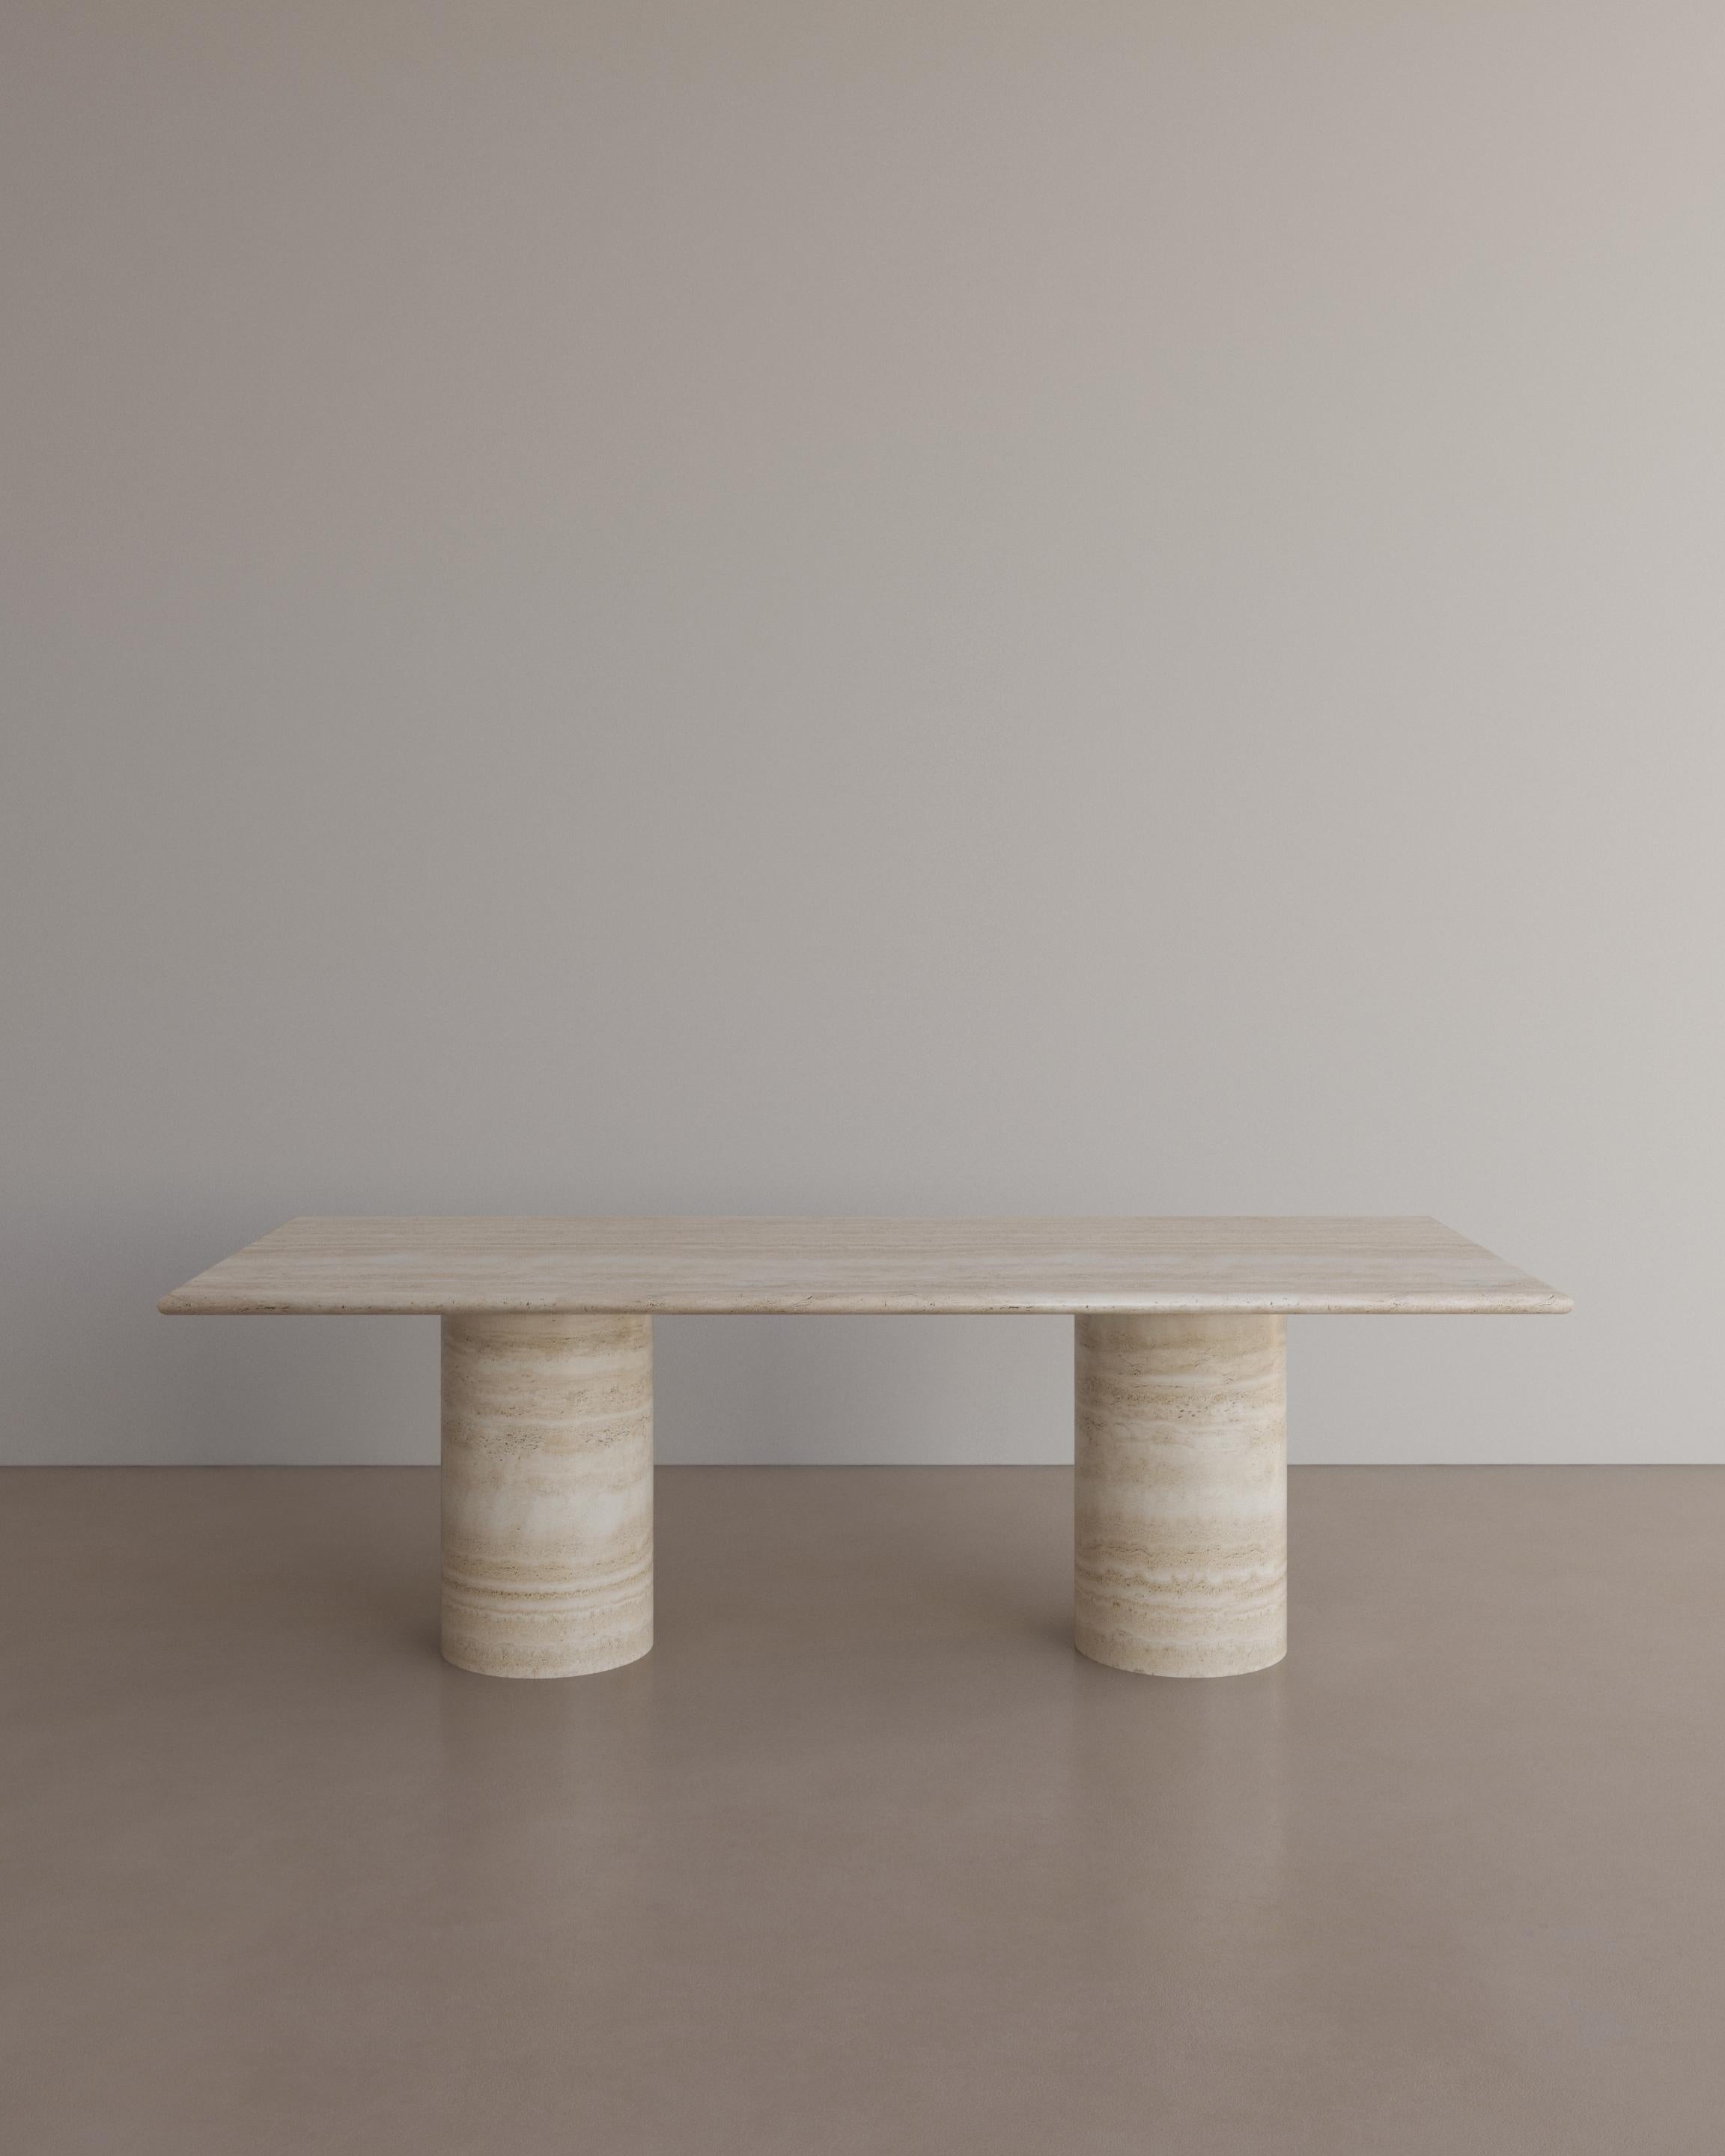 The Voyage Dining Table II in Nude Travertine by The Essentialist celebrates the simple pleasures that define life and replenish the soul through harnessing essential form. Envisioned as an ode to historical elegance, captured through a modern lens